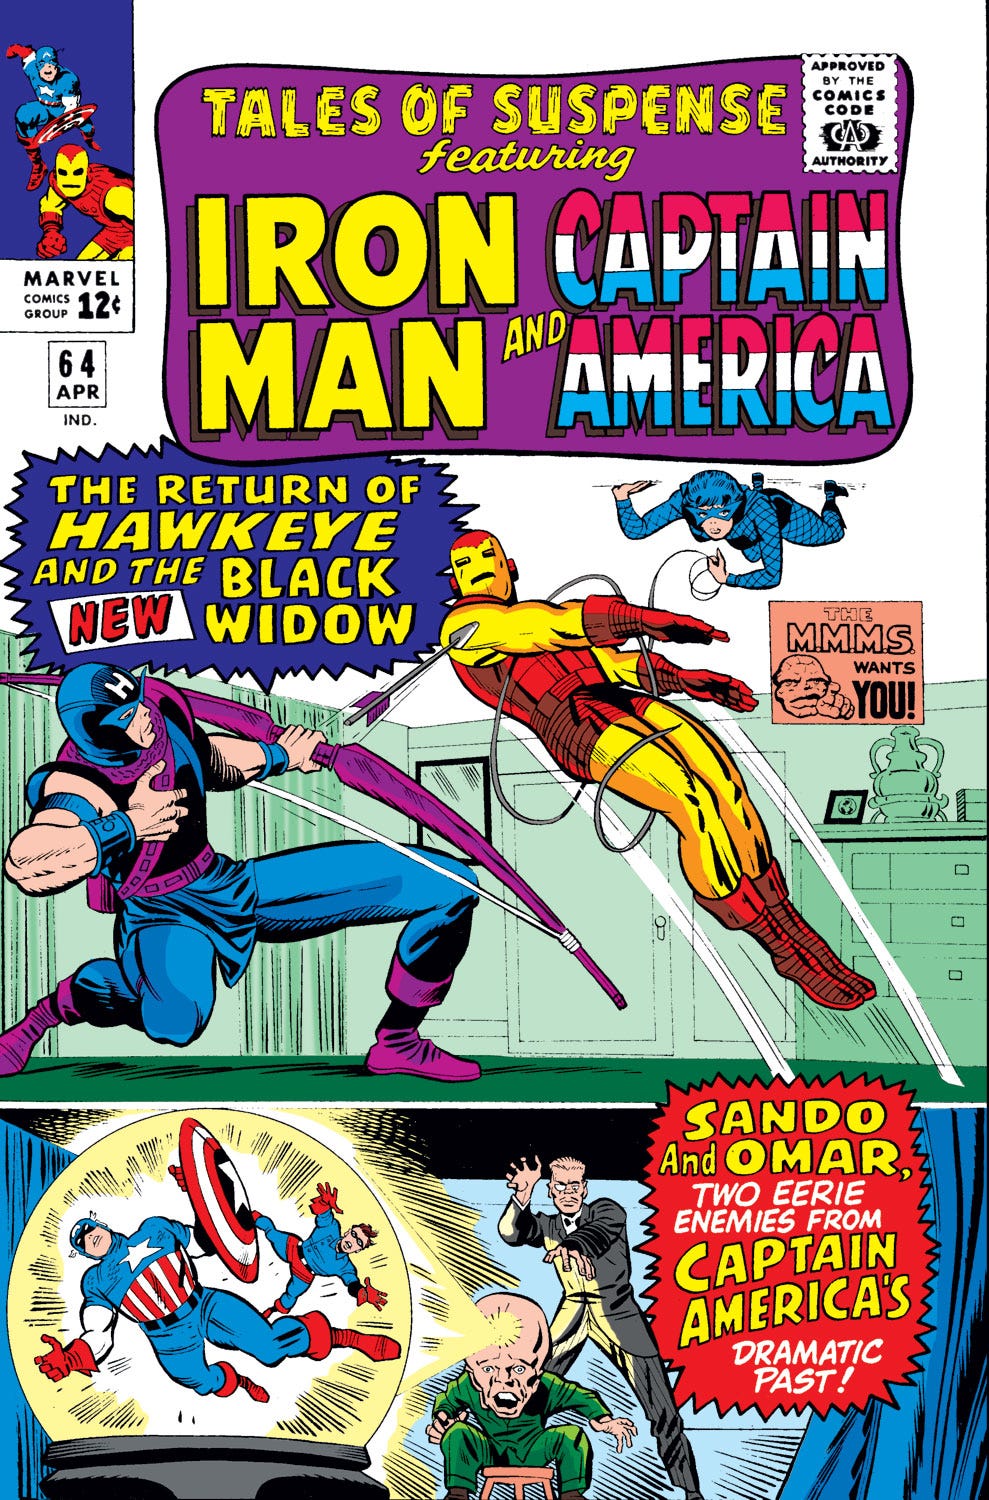 Tales of Suspense (1959) #64 | Comic Issues | Marvel